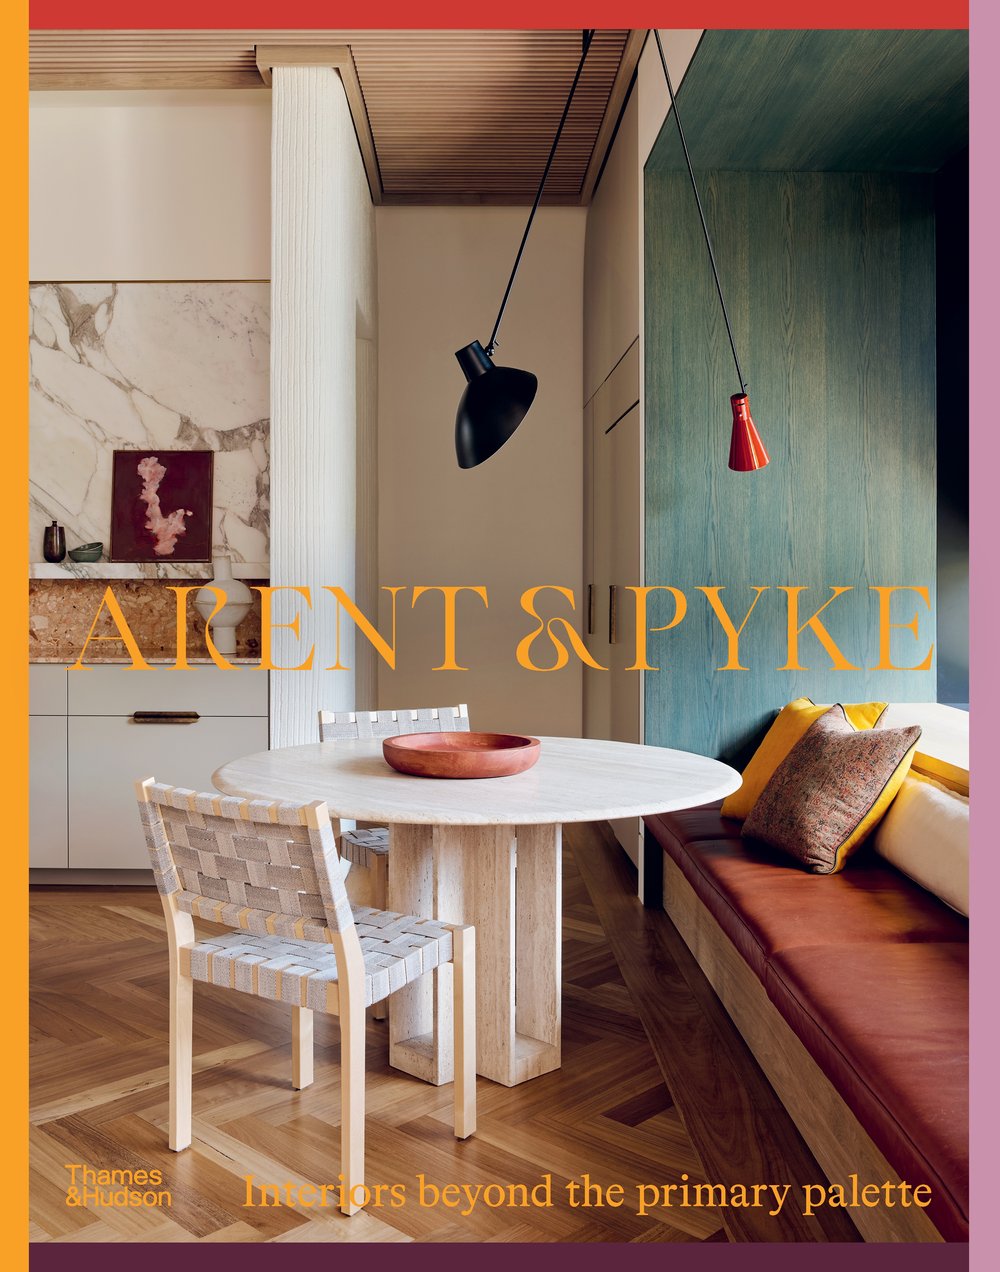 Cover - Interiors Beyond the Primary Palette by Arent & Pyke - HR.jpg